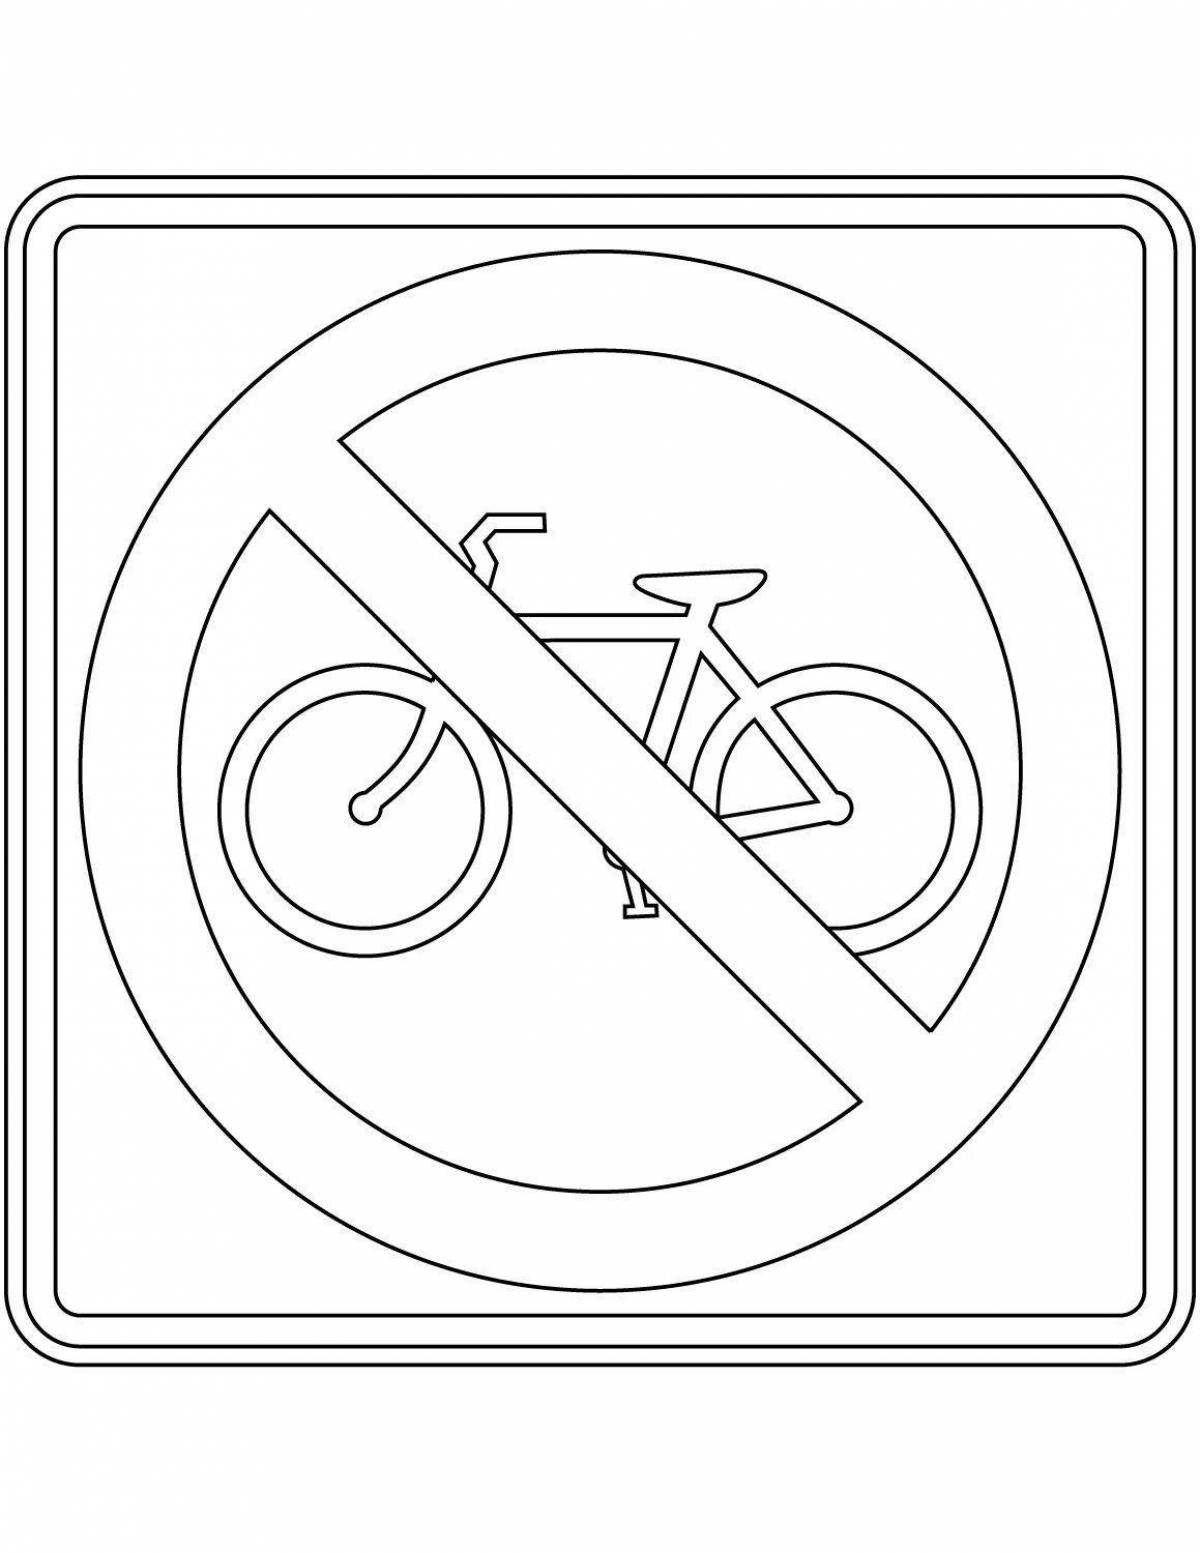 Impressive class 2 traffic sign coloring pages